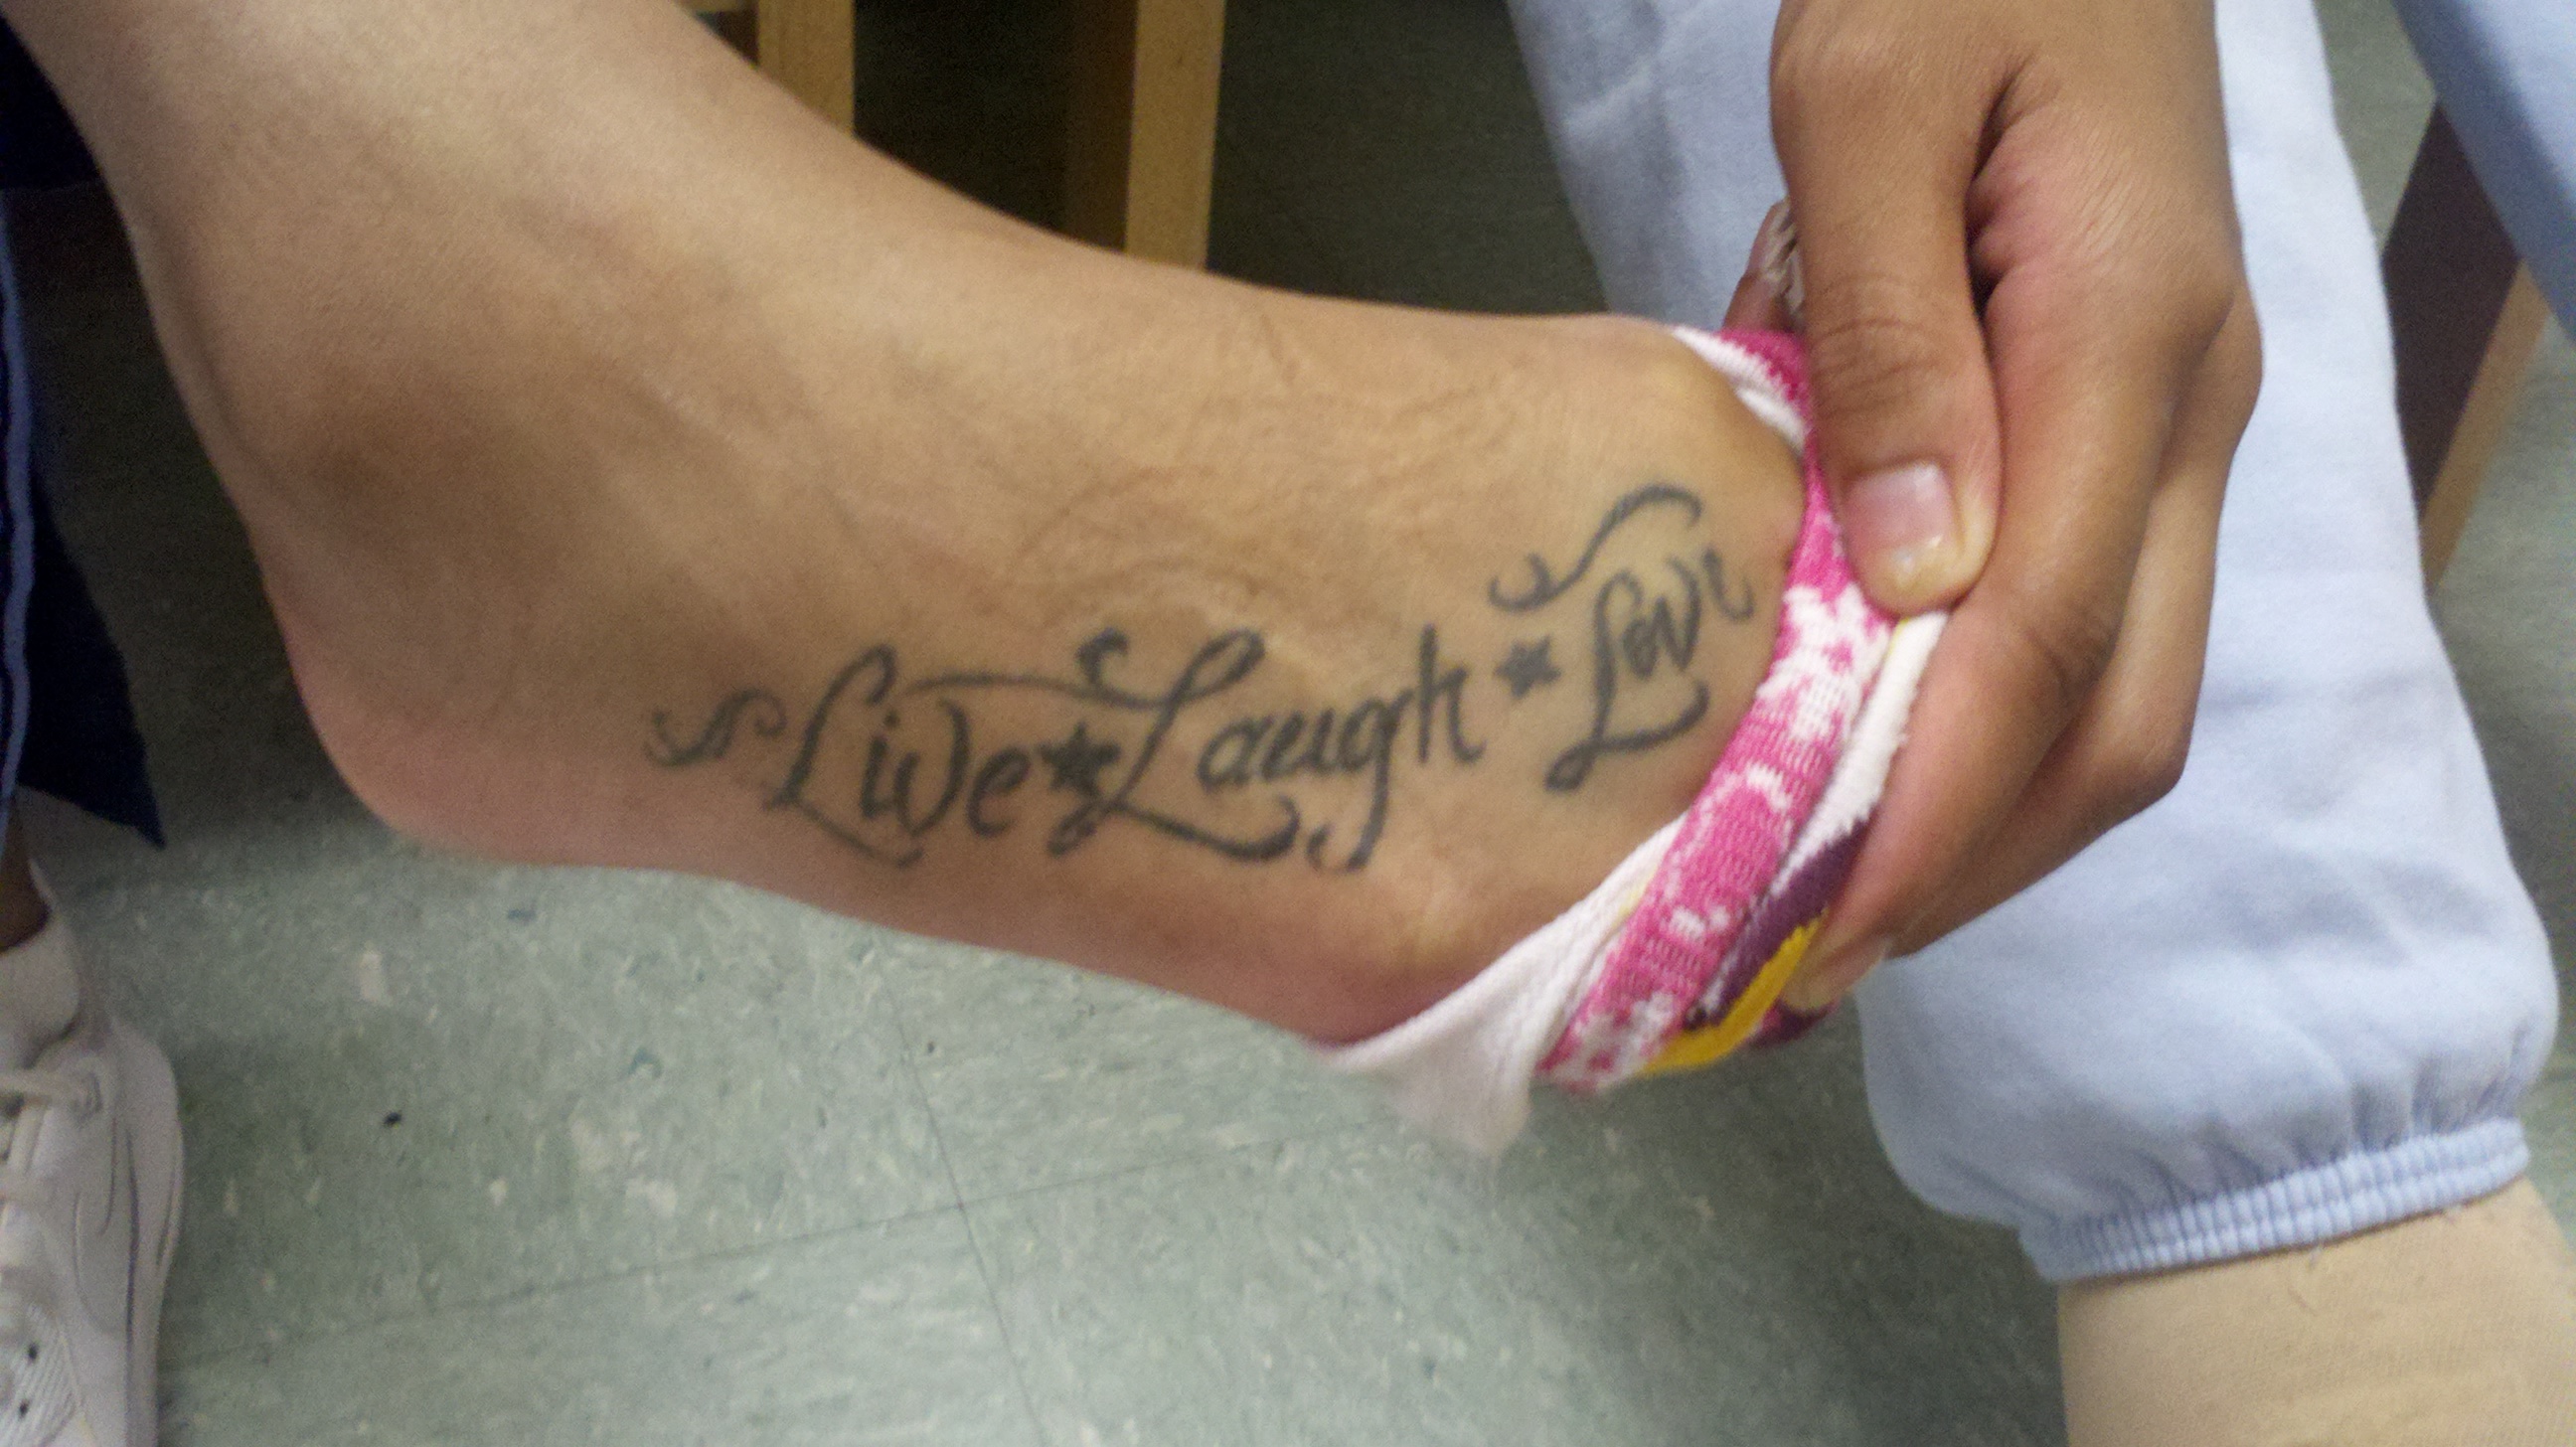 Live Laugh Love Tattoos Designs Ideas and Meaning  Tattoos For You